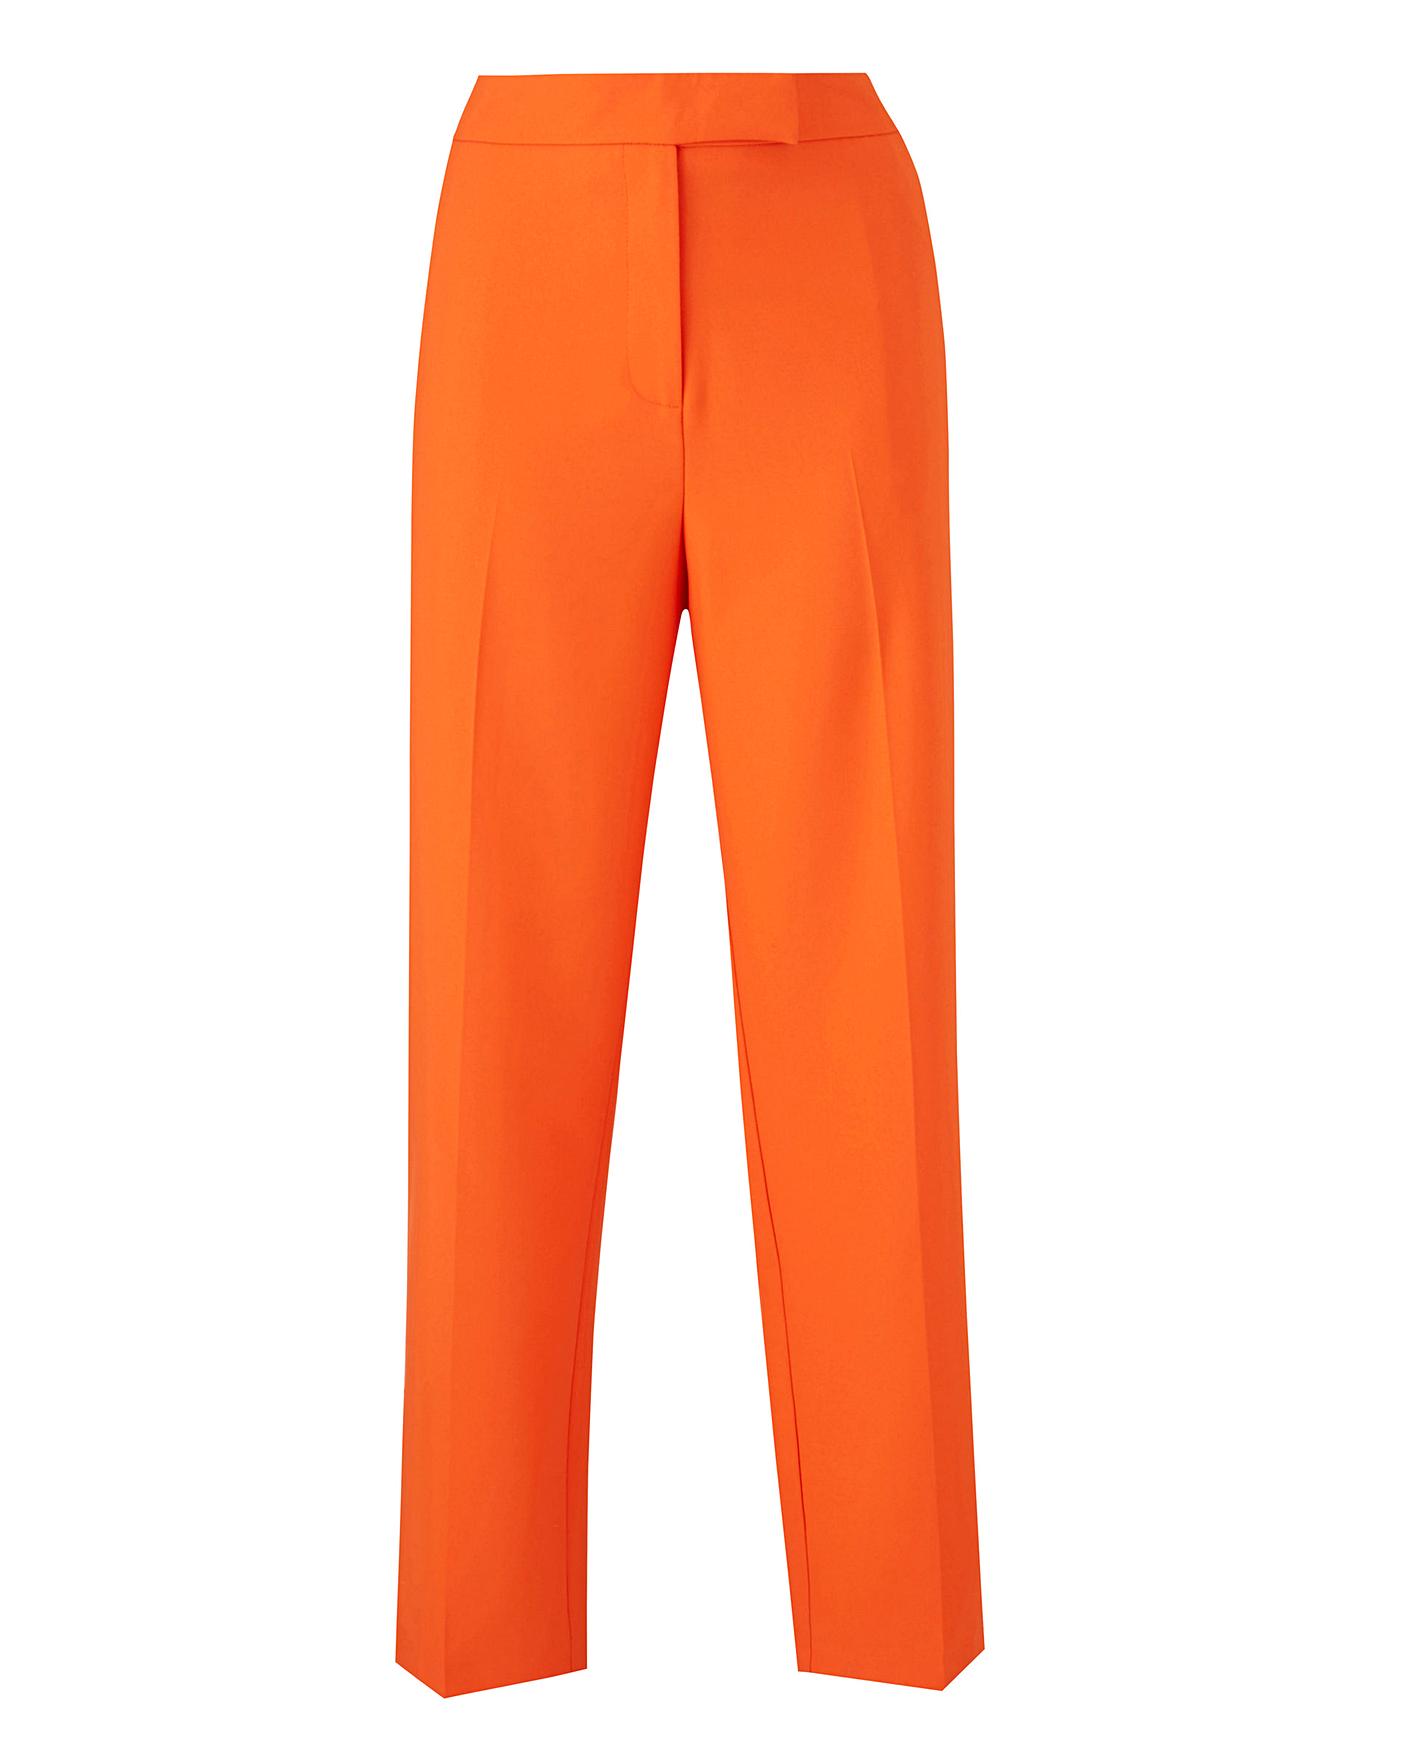 Orange Tapered Leg Trousers | Simply Be